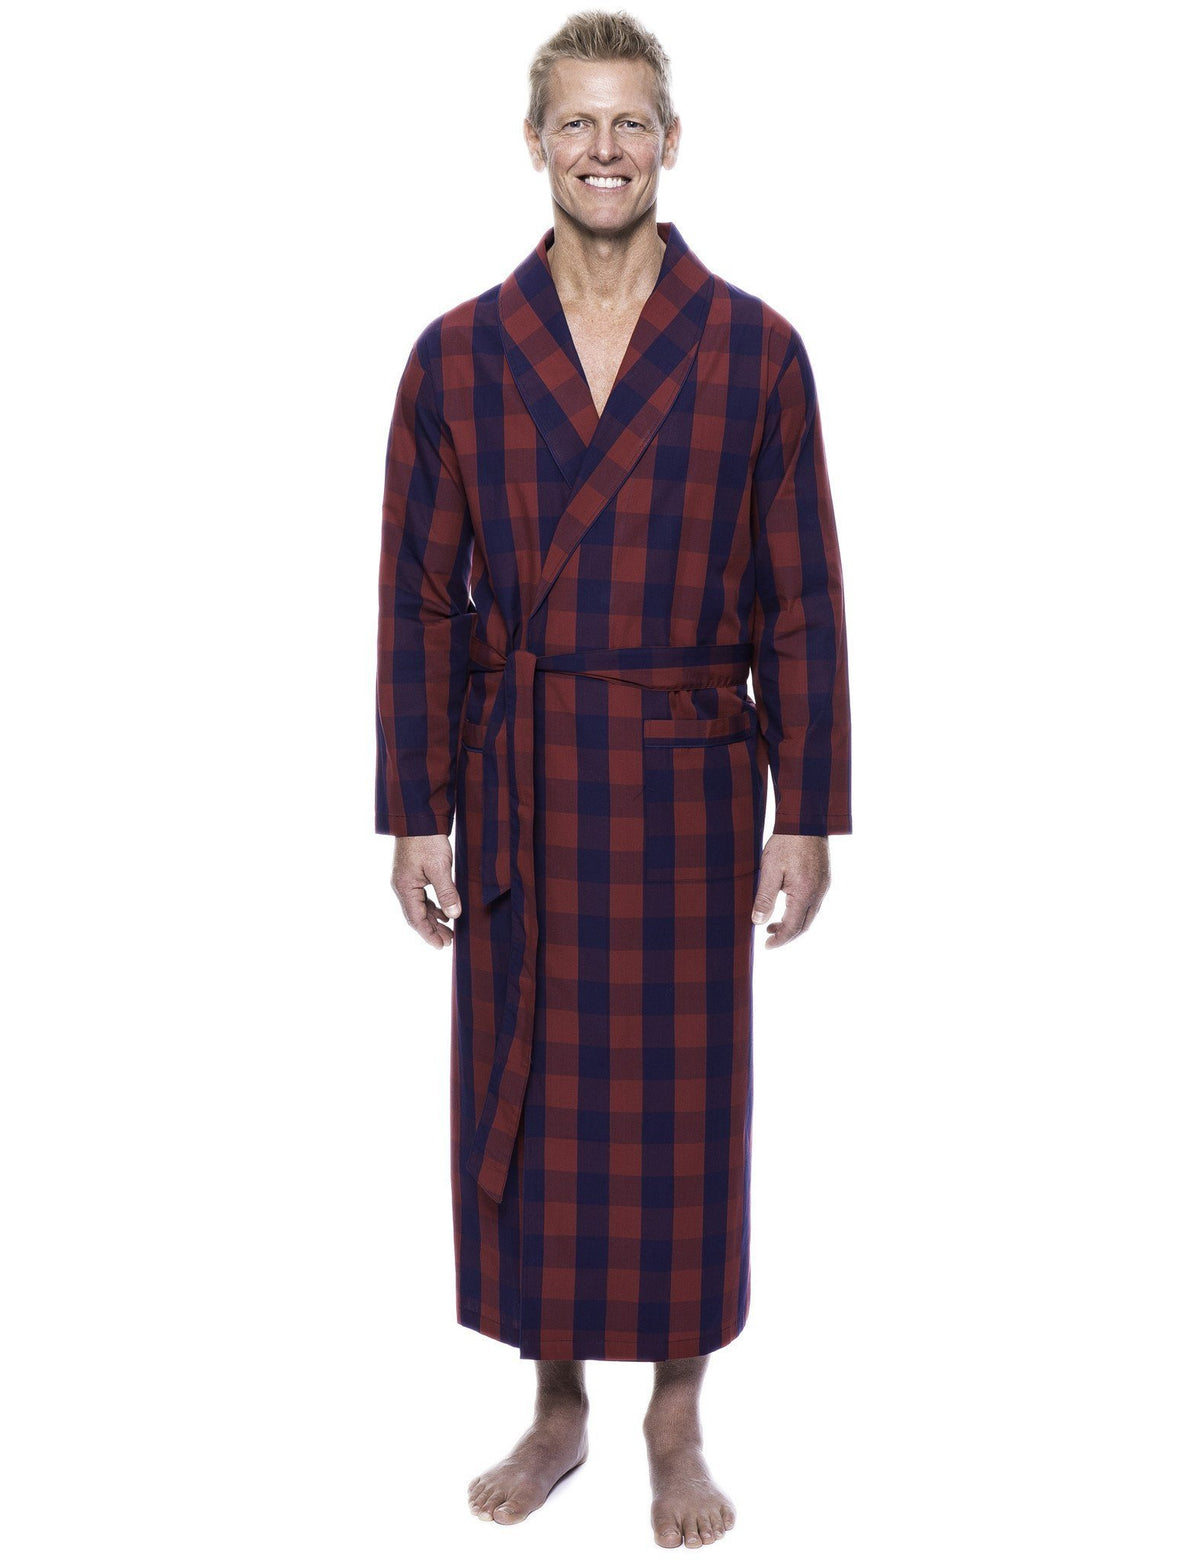 Men's 100% Woven Cotton Robe - Gingham Red/Navy